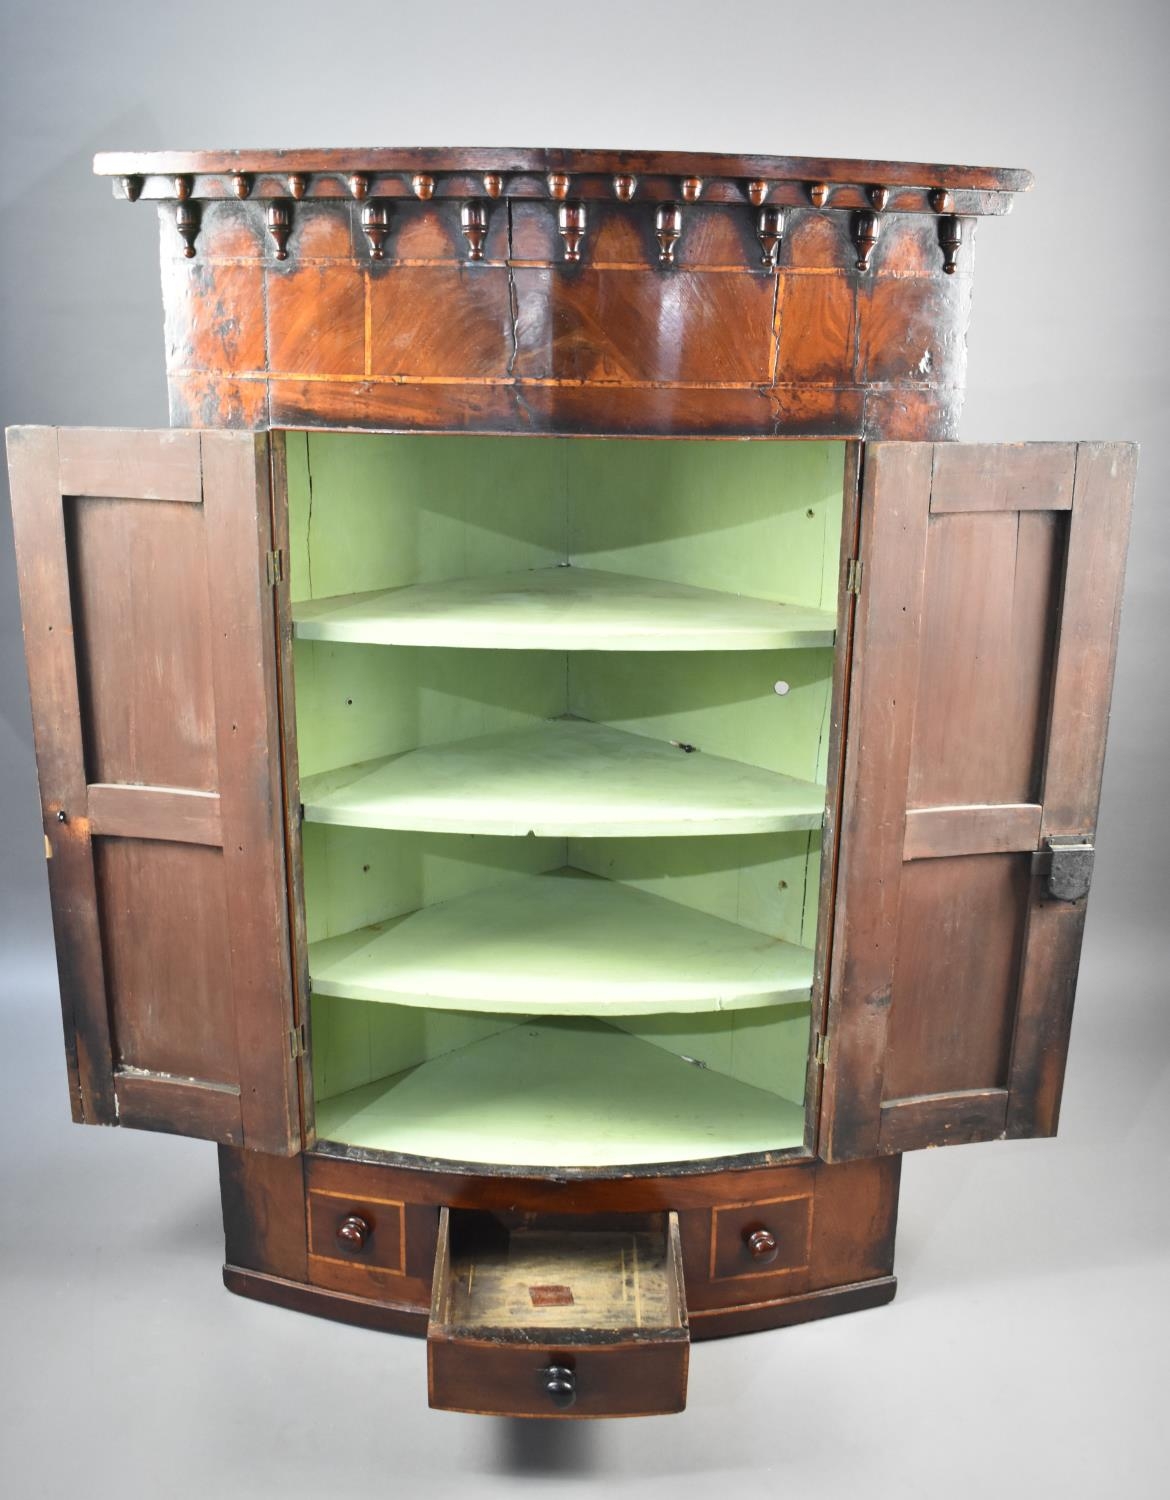 A Mid 19th Century Inlaid Mahogany Bow Fronted Wall Hanging Corner Cabinet with Panelled Doors and - Image 2 of 2